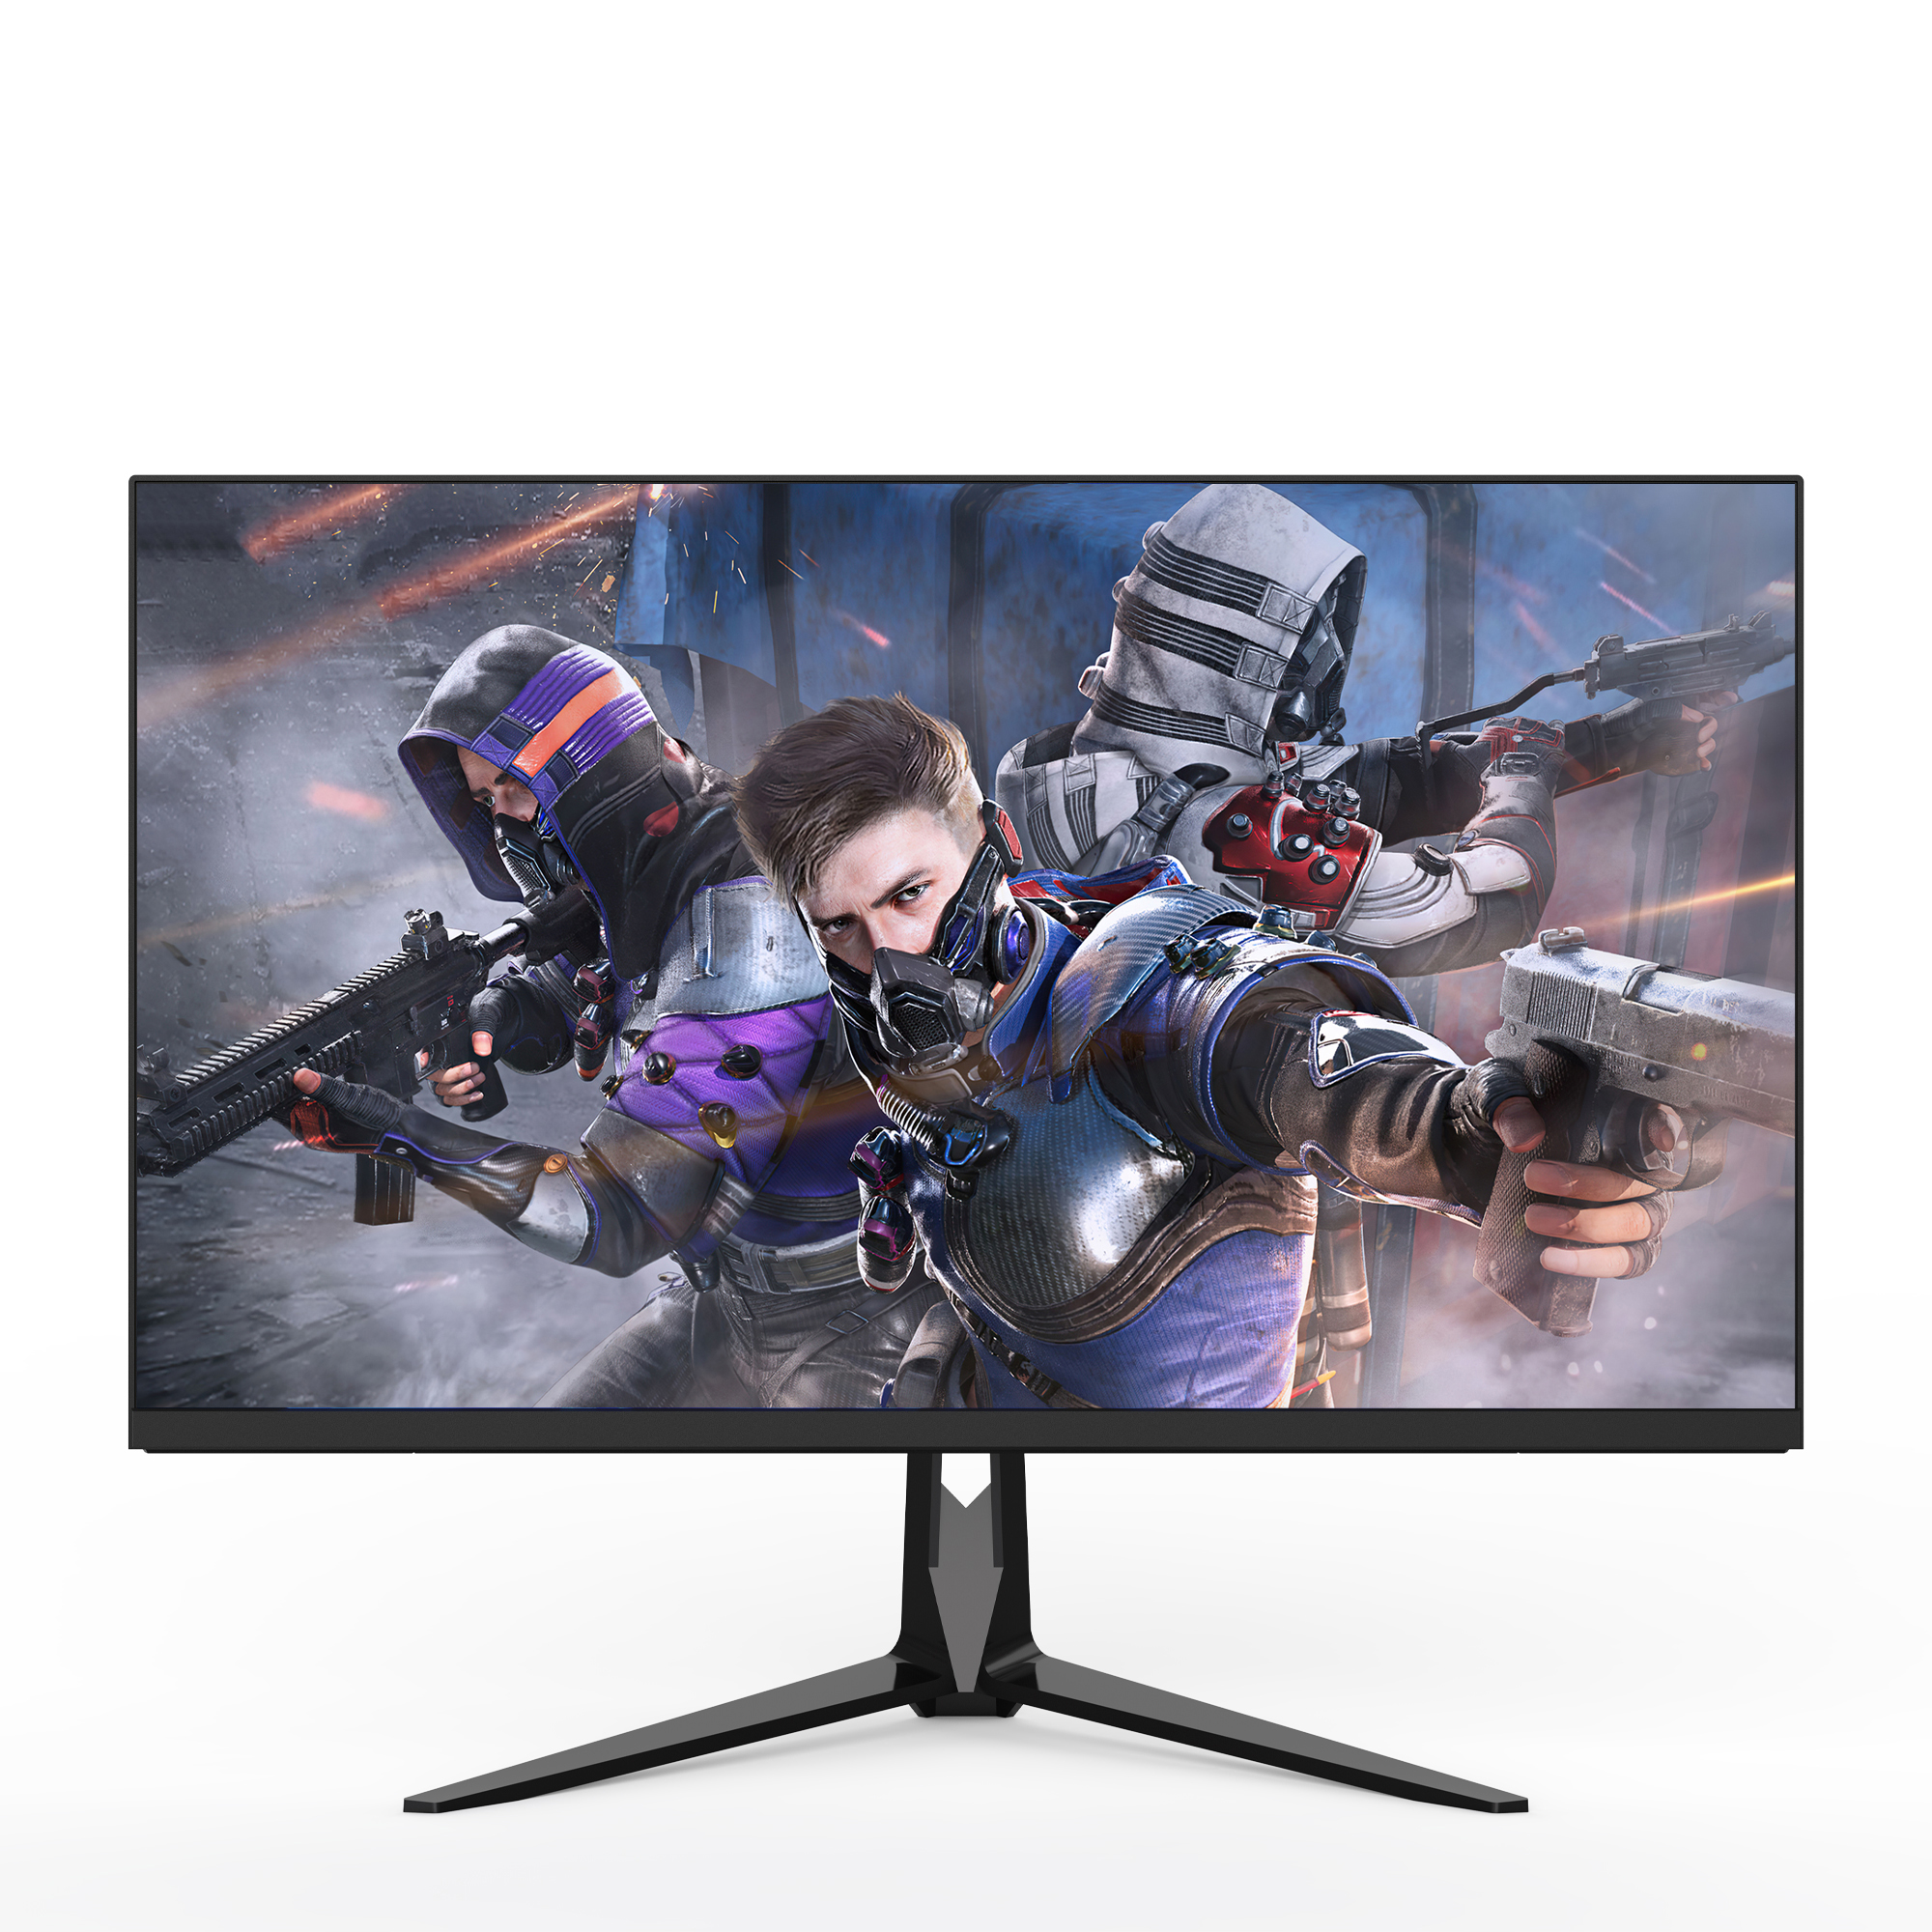 Model: PG27DUI-144Hz Featured Image